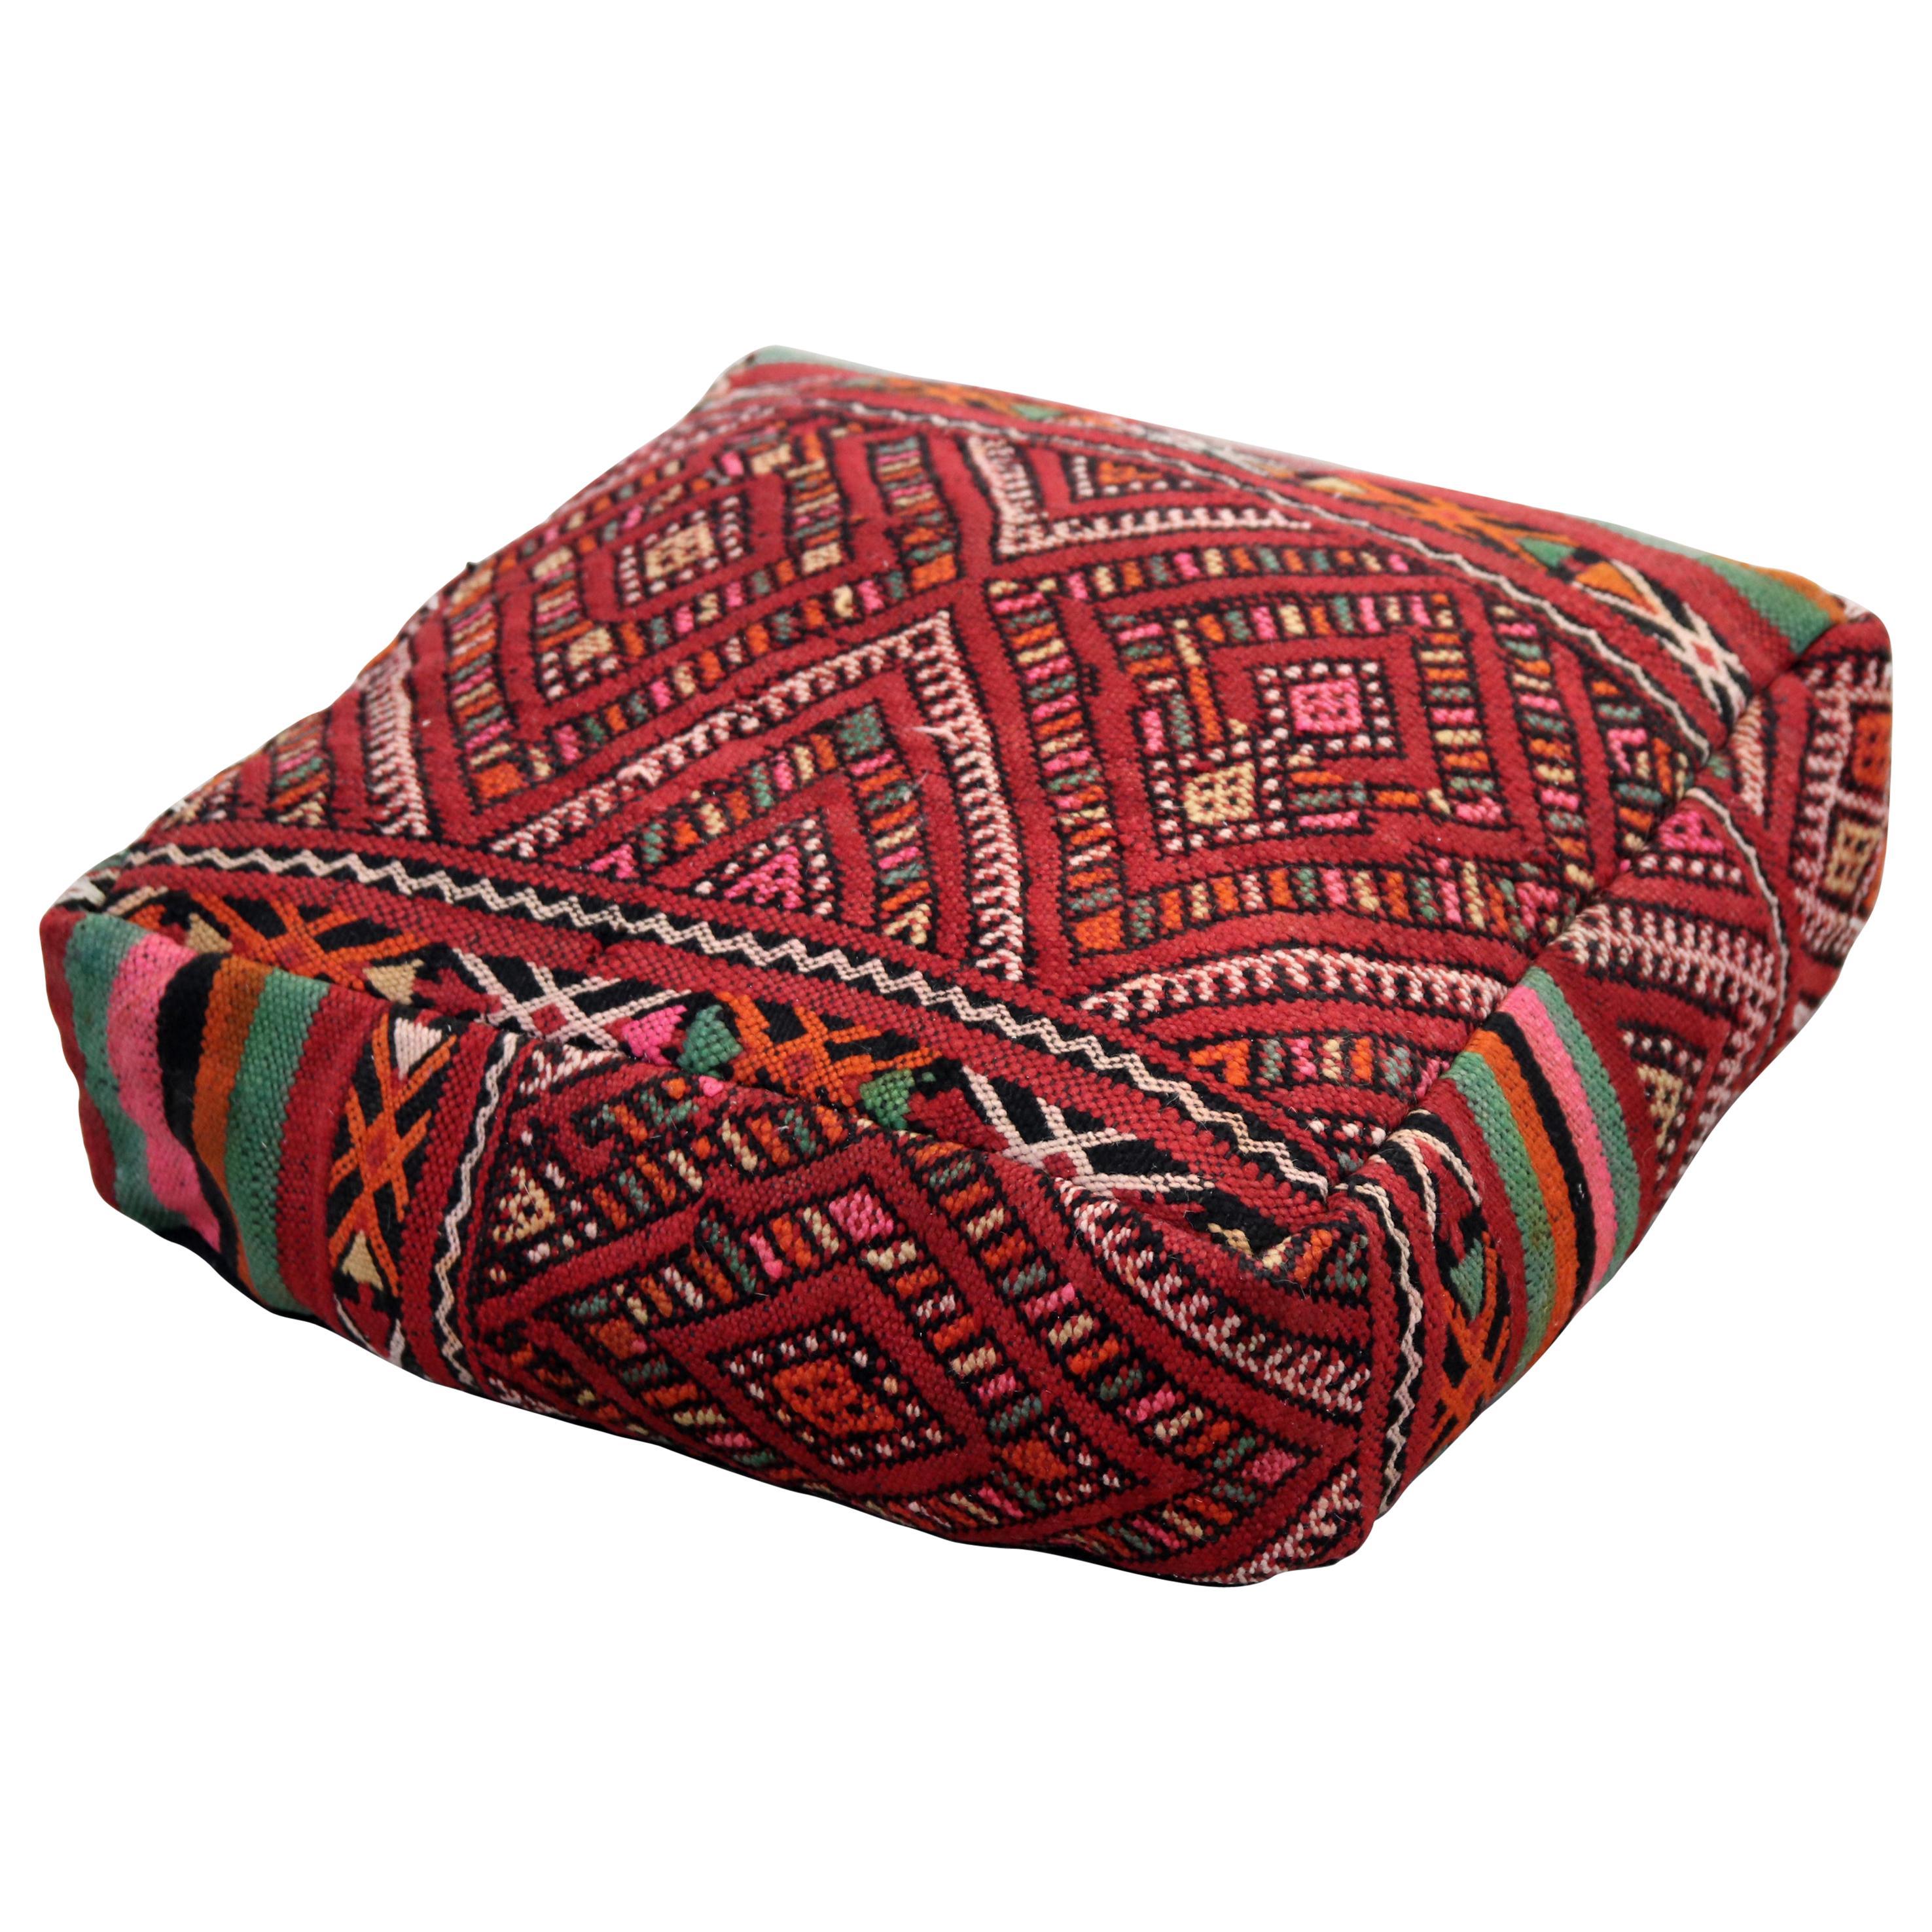 Vintage Moroccan pouf made from a Zemmour rug by Berber Tribe